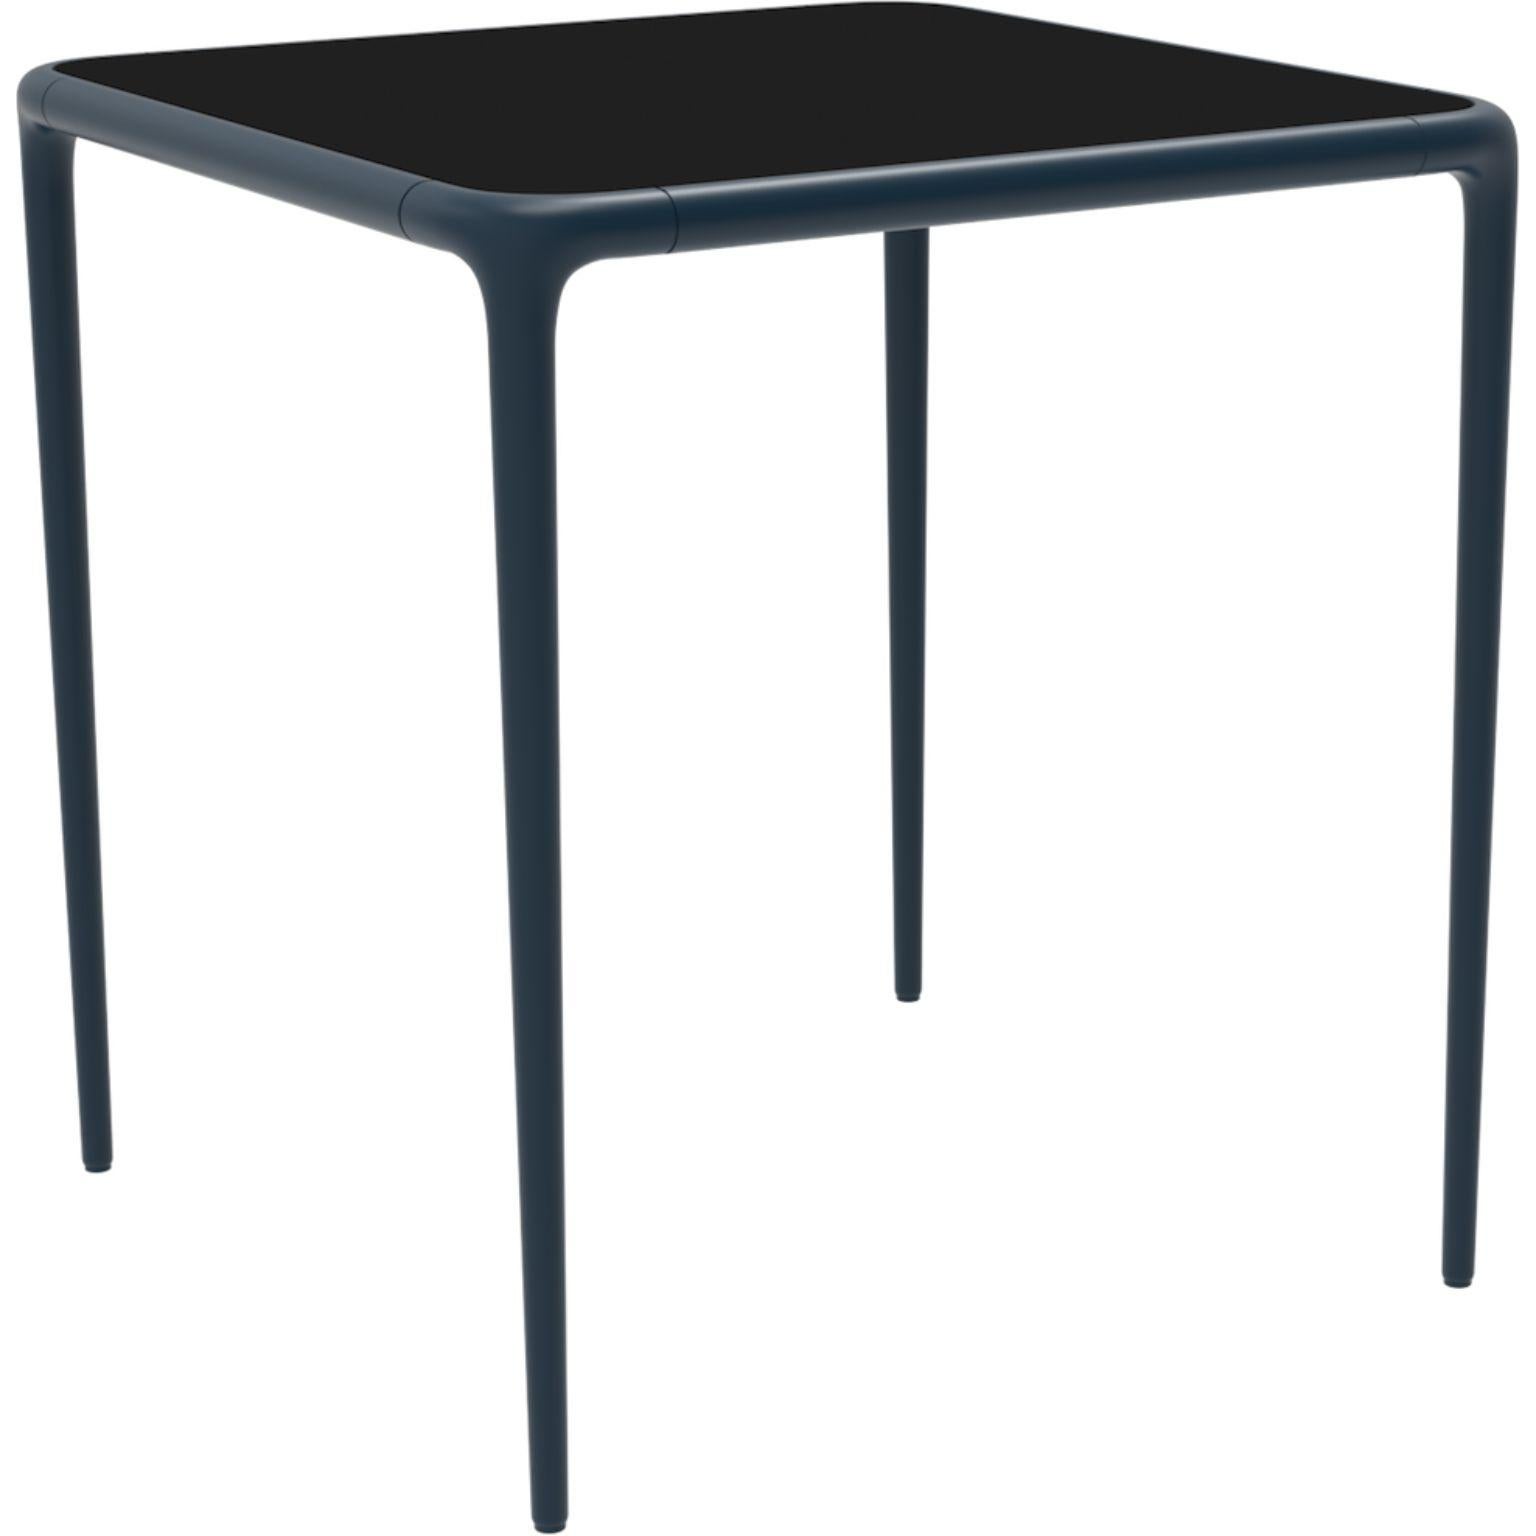 Xaloc Navy glass top table 70 by Mowee
Dimensions: D 70 x W 70 x H 74 cm
Material: Aluminum, tinted tempered glass top.
Also available in different aluminum colors and finishes (HPL Black Edge or Neolith).

Xaloc synthesizes the lines of